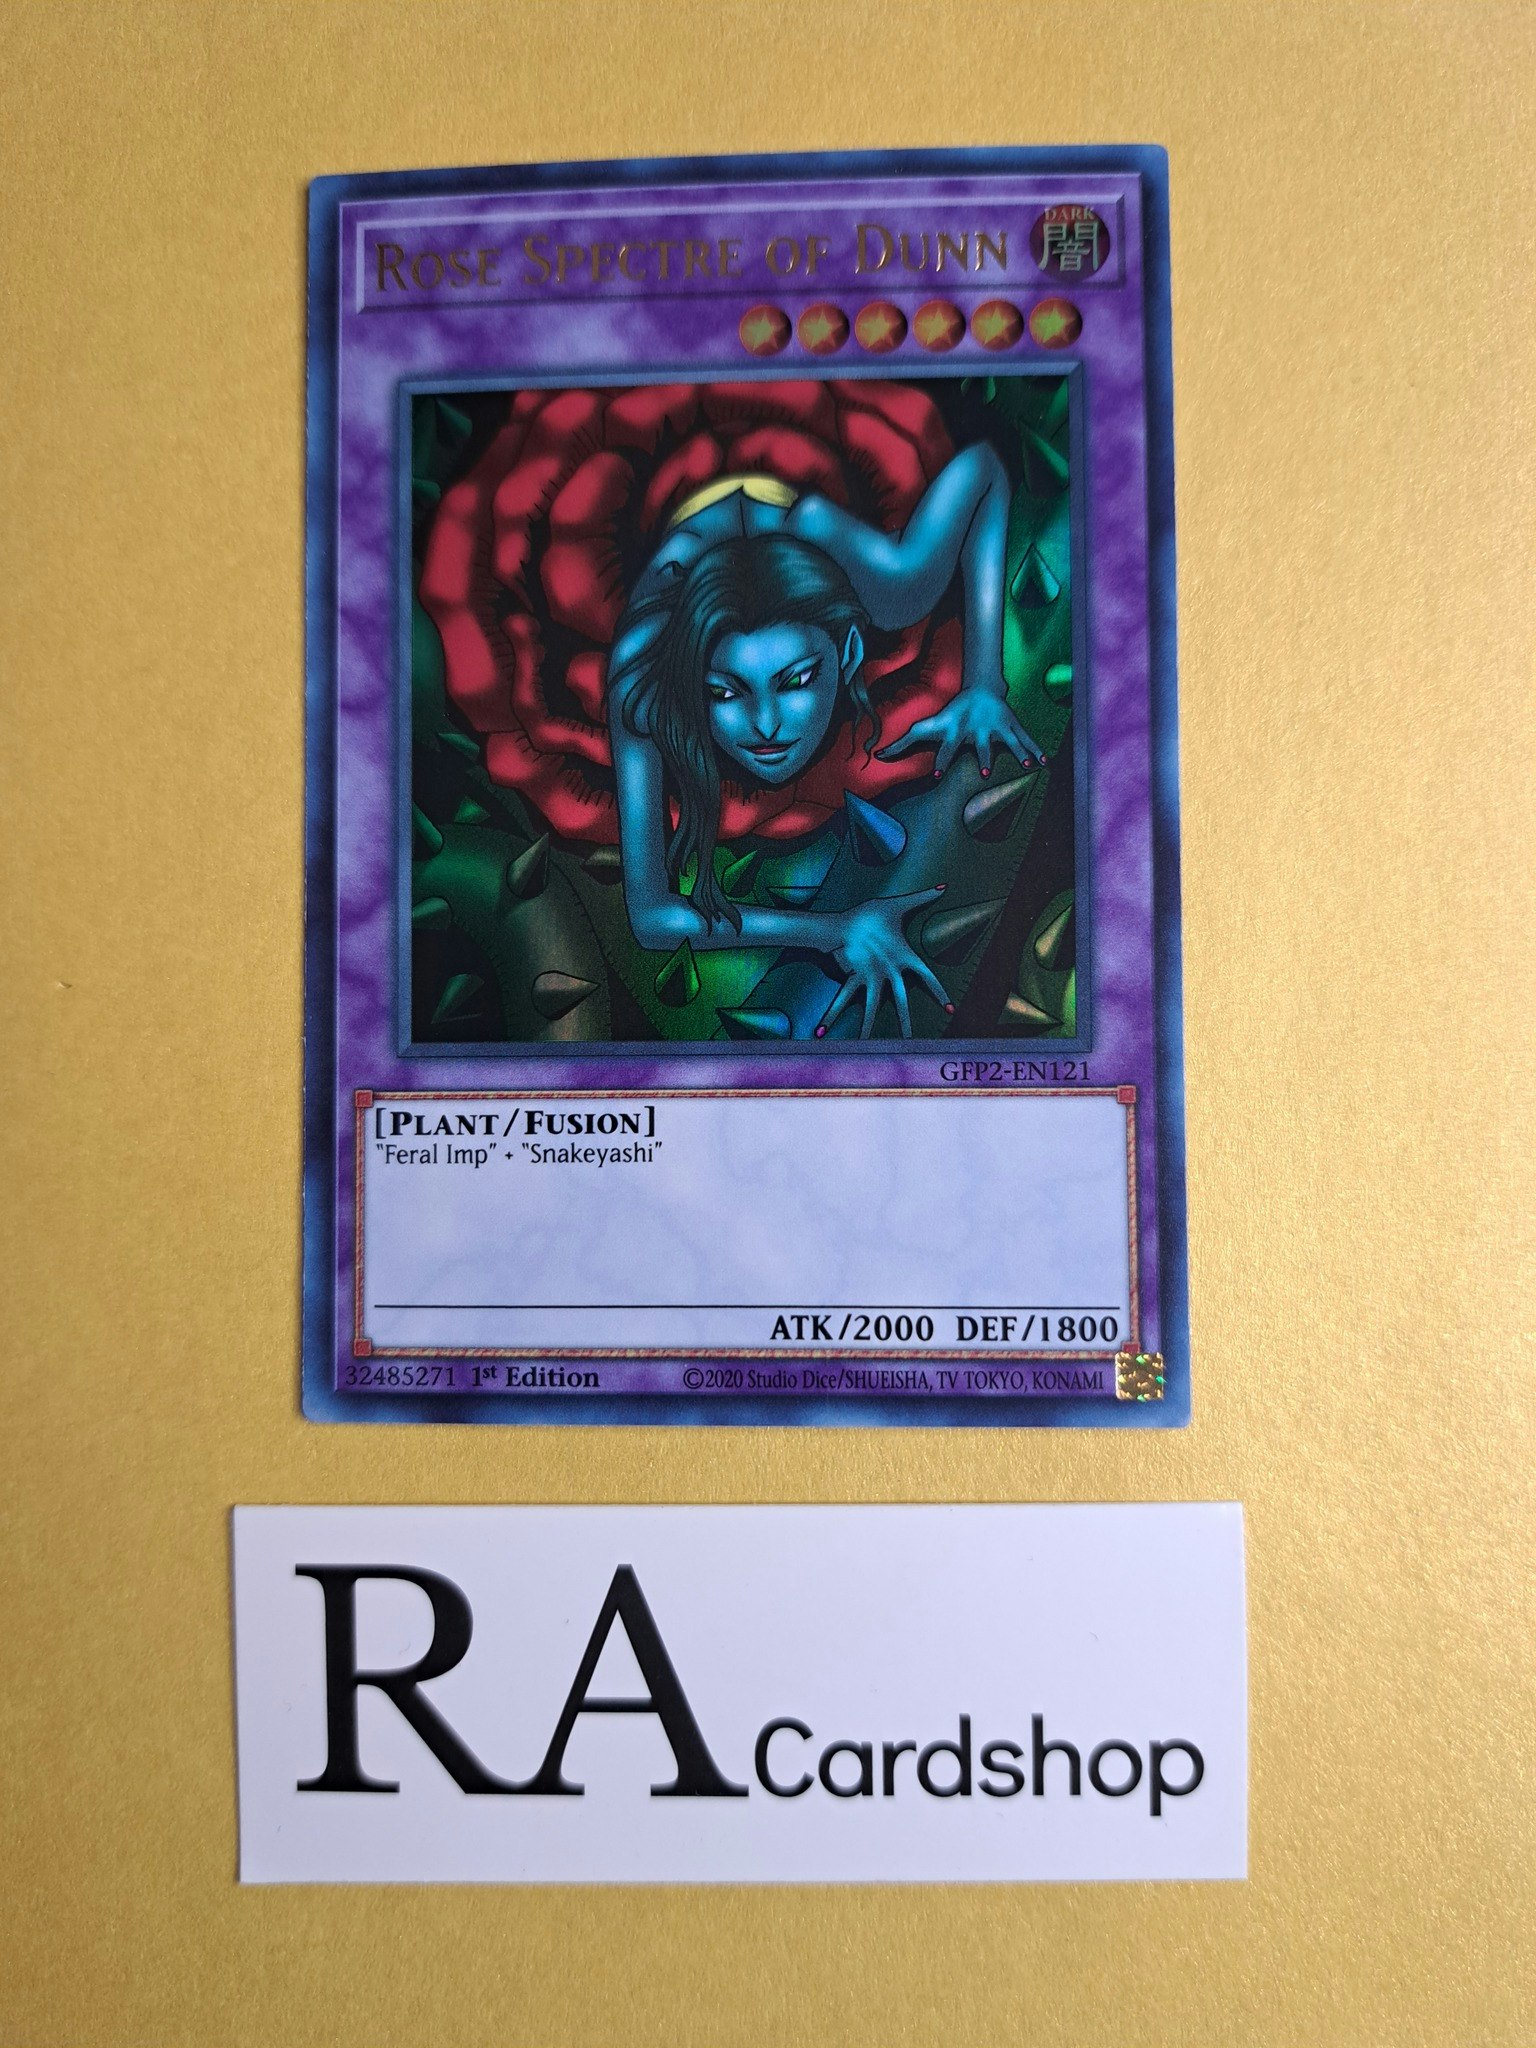 Rose Spectre of Dunn 1st Edition EN121 Ghosts From the Past: The 2nd Haunting GFP2 Yu-Gi-Oh